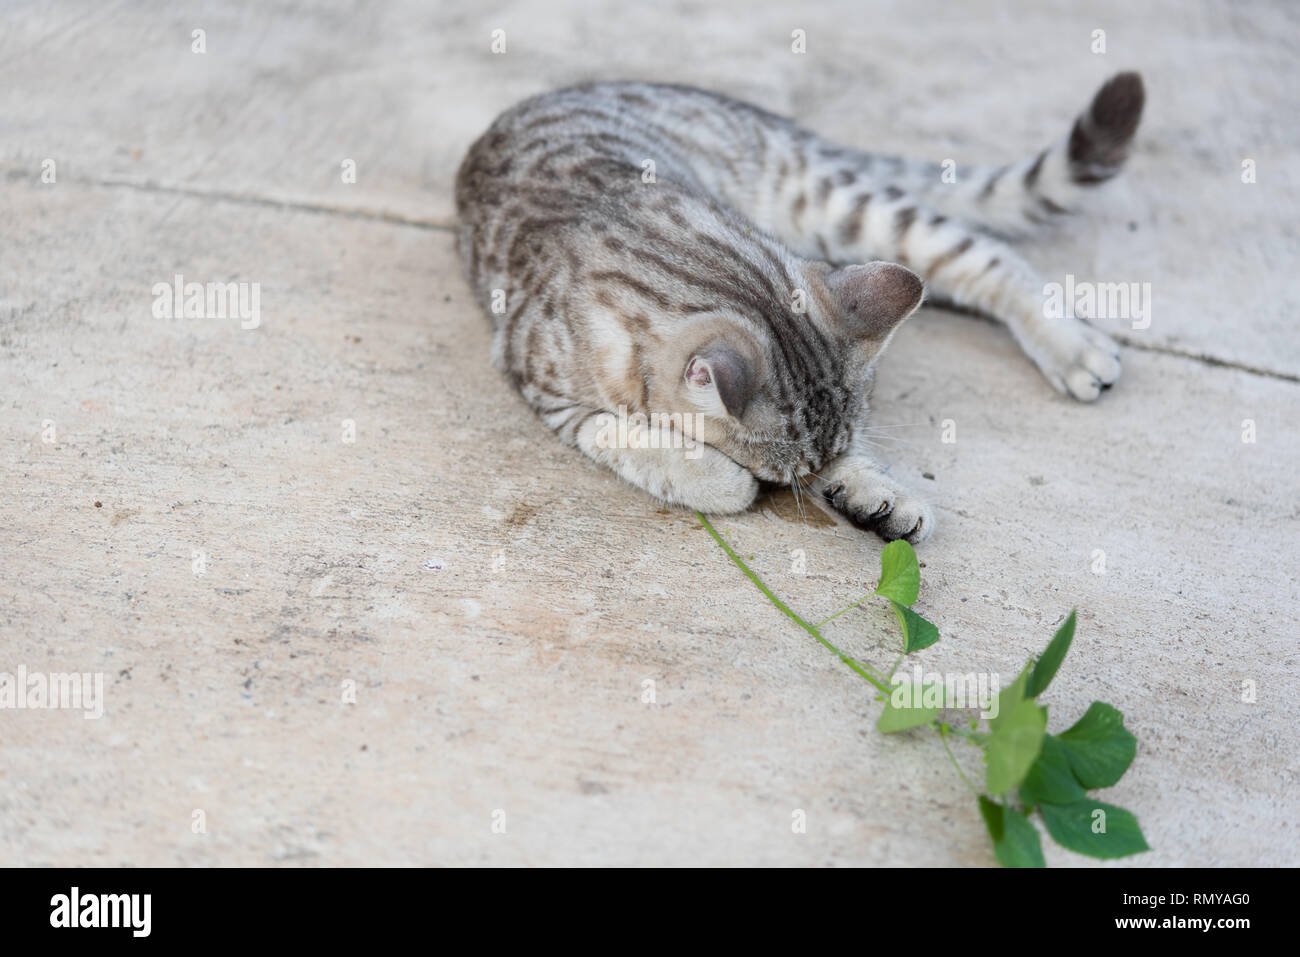 Lovely tubby cat eating ,Catnip, Indian Acalypha tree,Catnip herb for cat has a scent like Pheromone Stock Photo